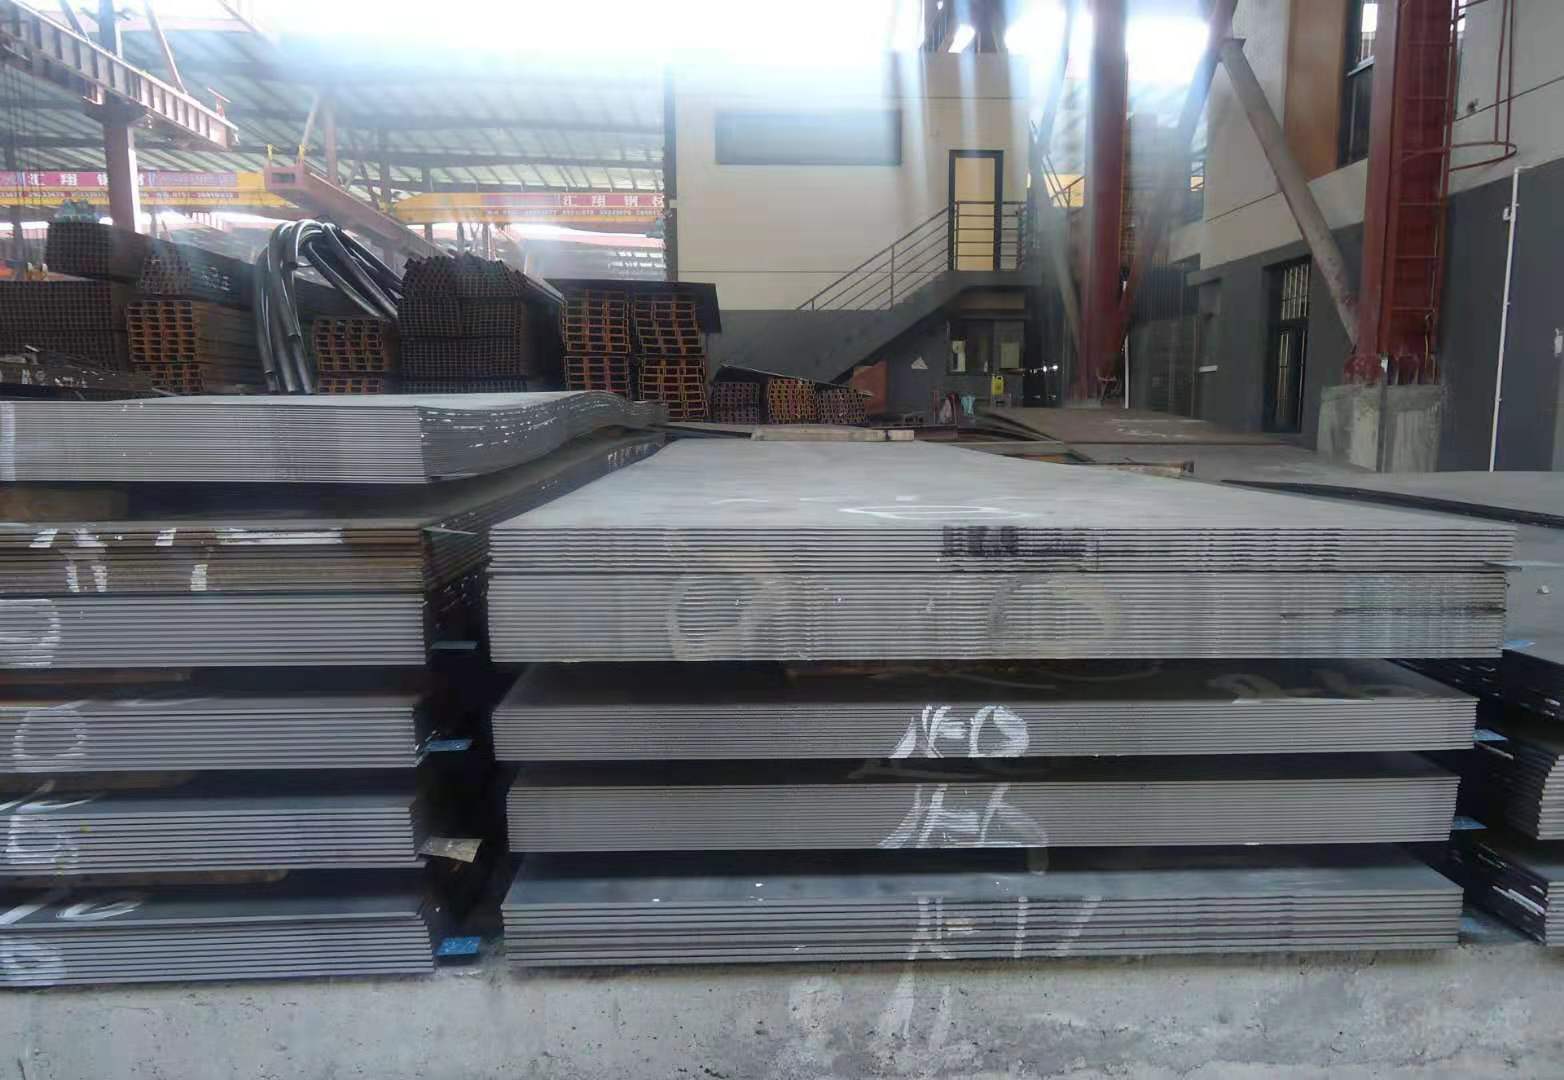 A588 1055 Cold Rolled Carbon Steel Sheet ST-37 S235jr S355jr SS400 Astm A36 S355 Steel Plate St52 Steel Plate